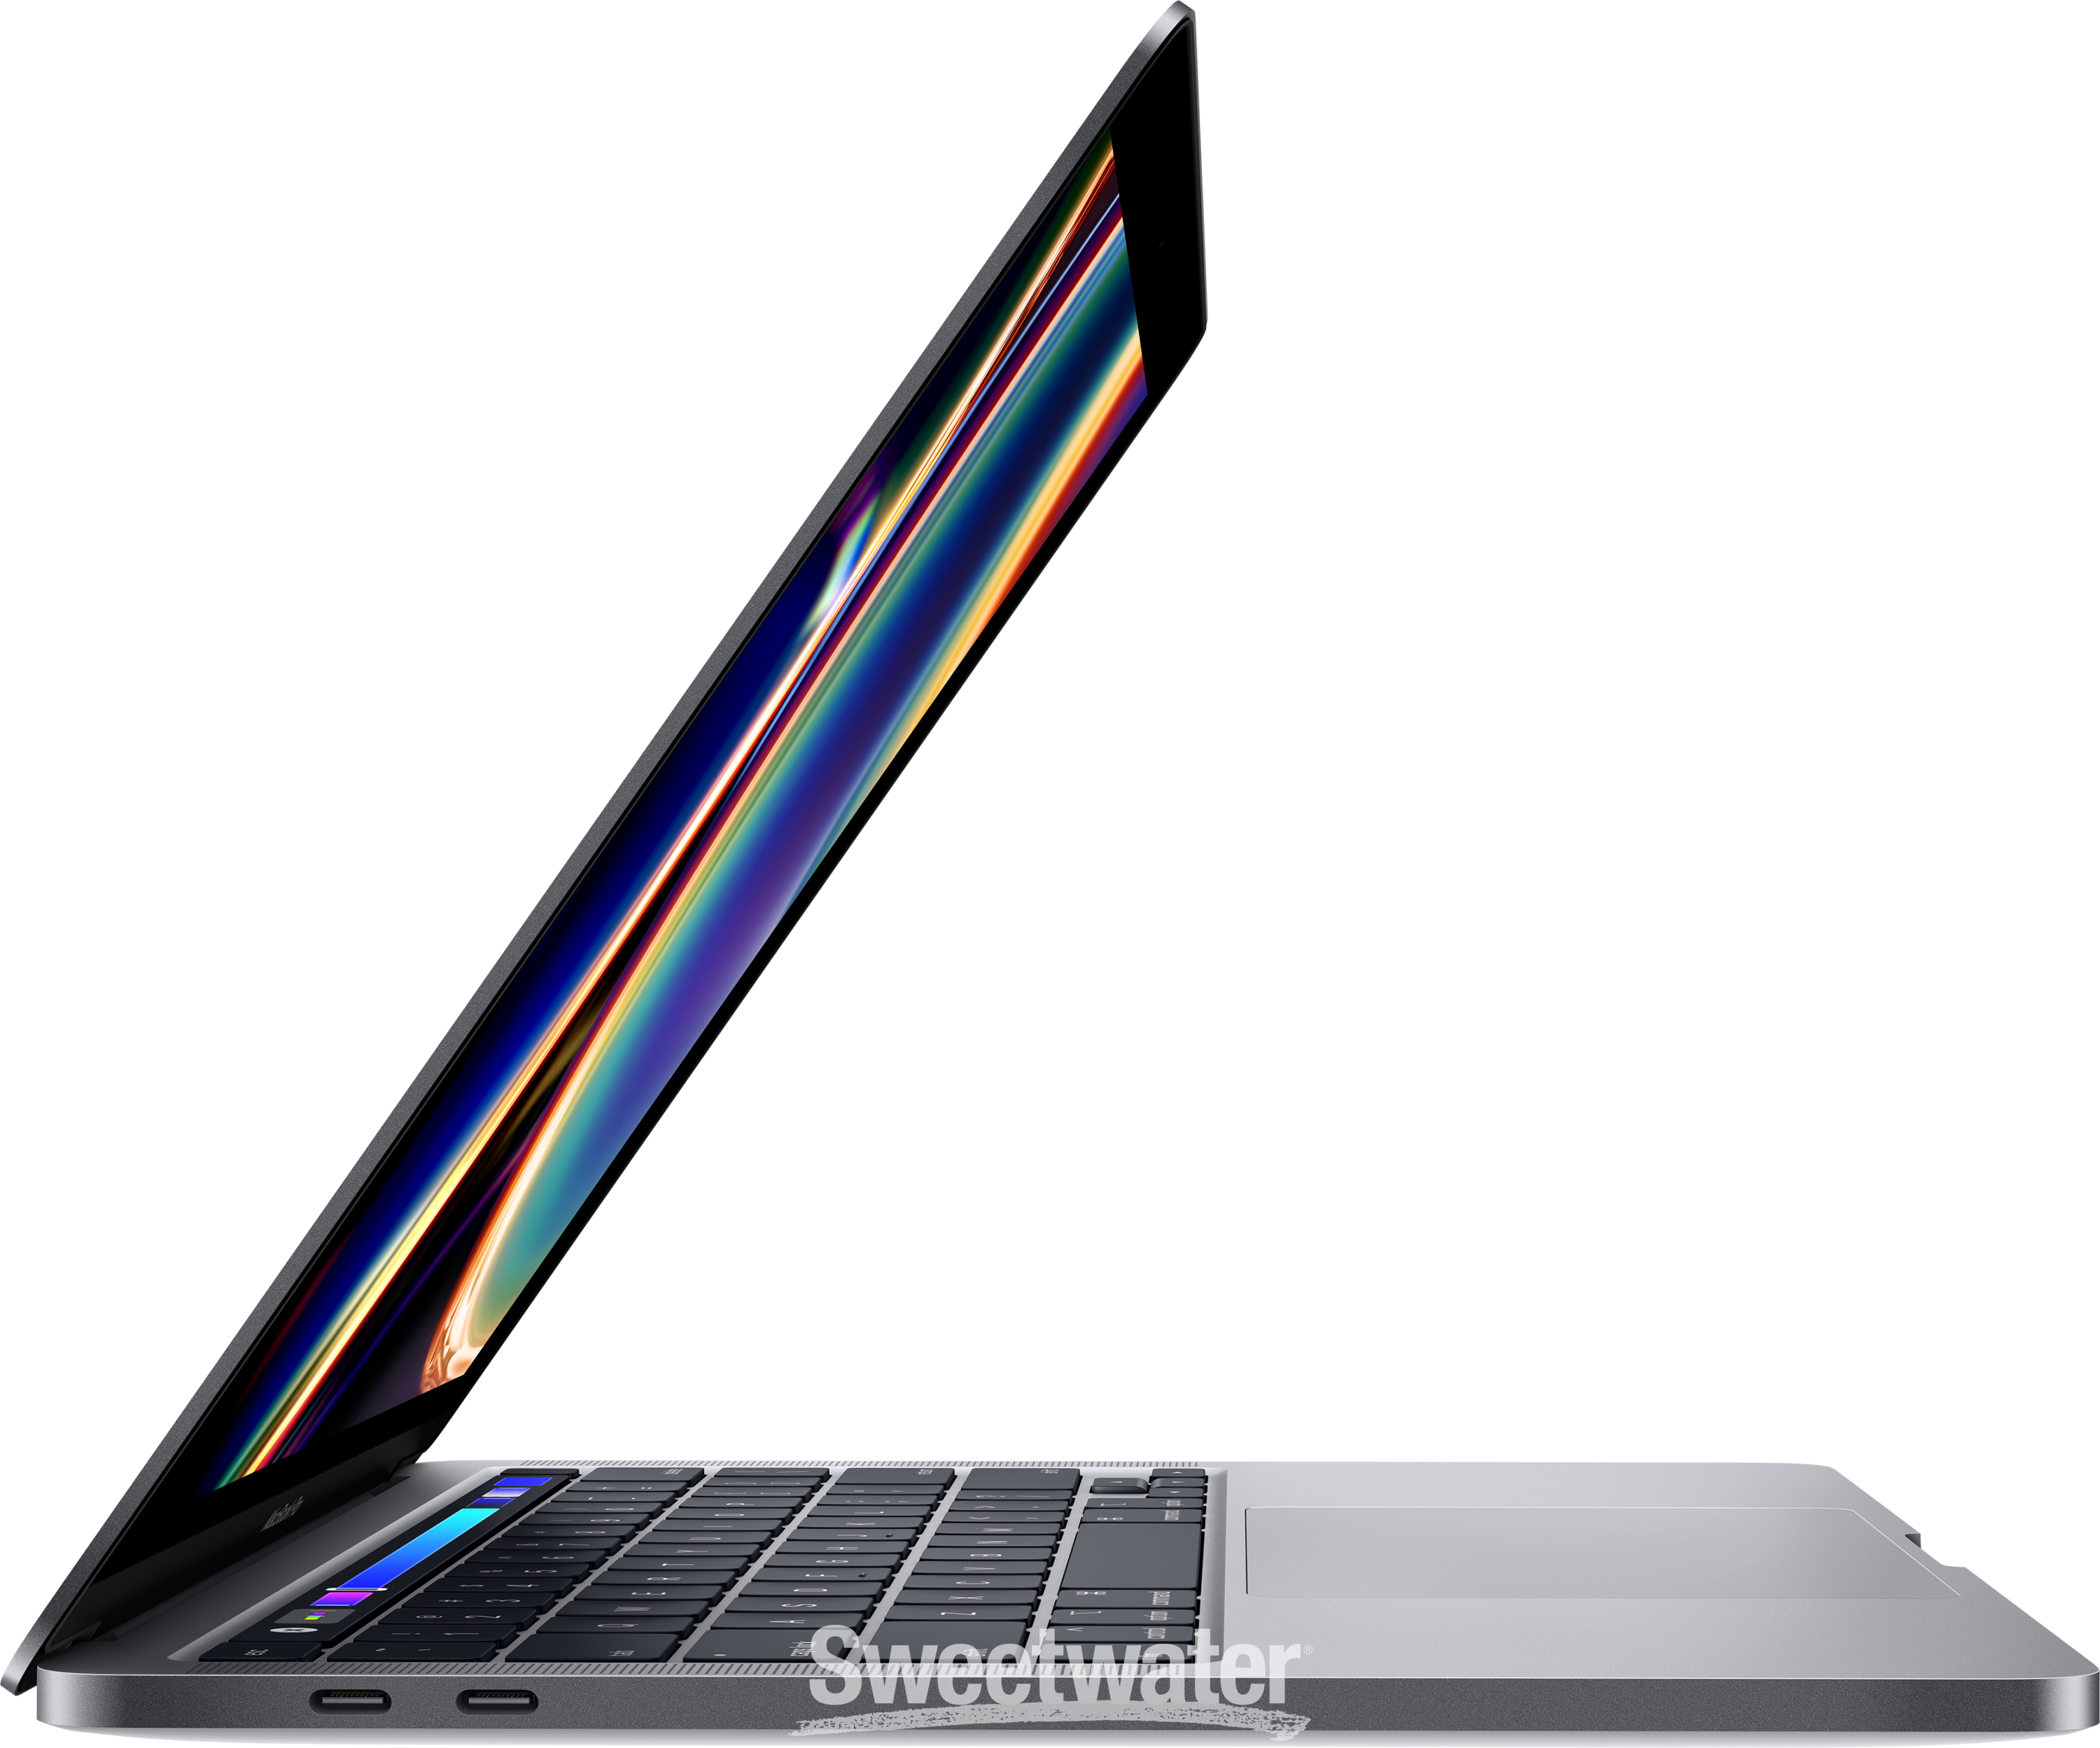 Apple MacBook Pro 13-inch w/Touch Bar 1.4 GHz 4-Core i5 256GB Space Gray |  Sweetwater